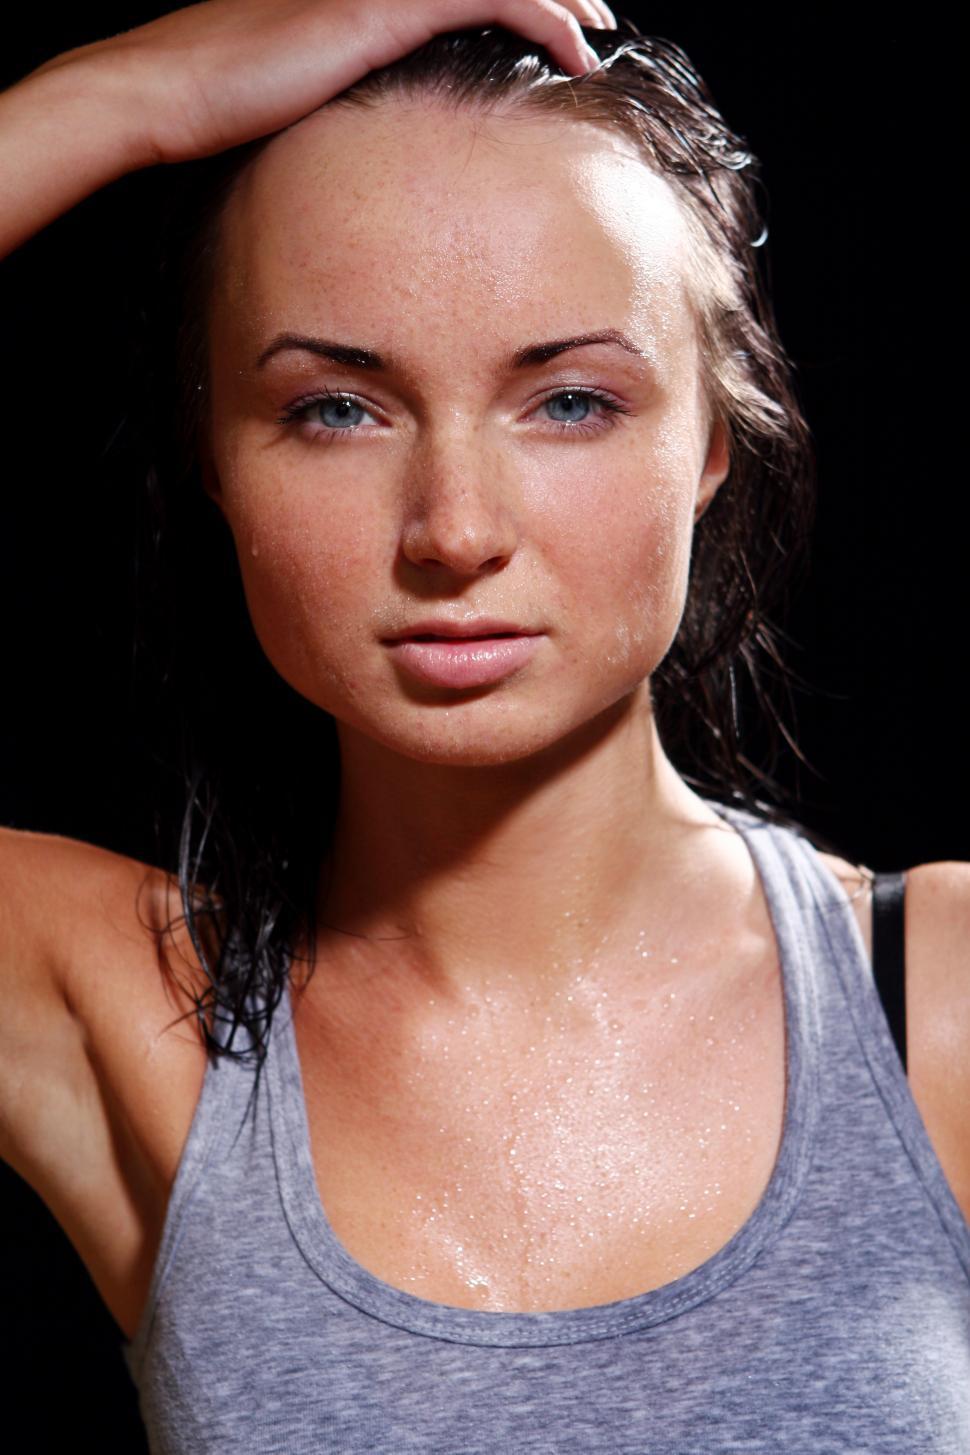 Download Free Stock Photo of Fit young woman worked up a sweat 